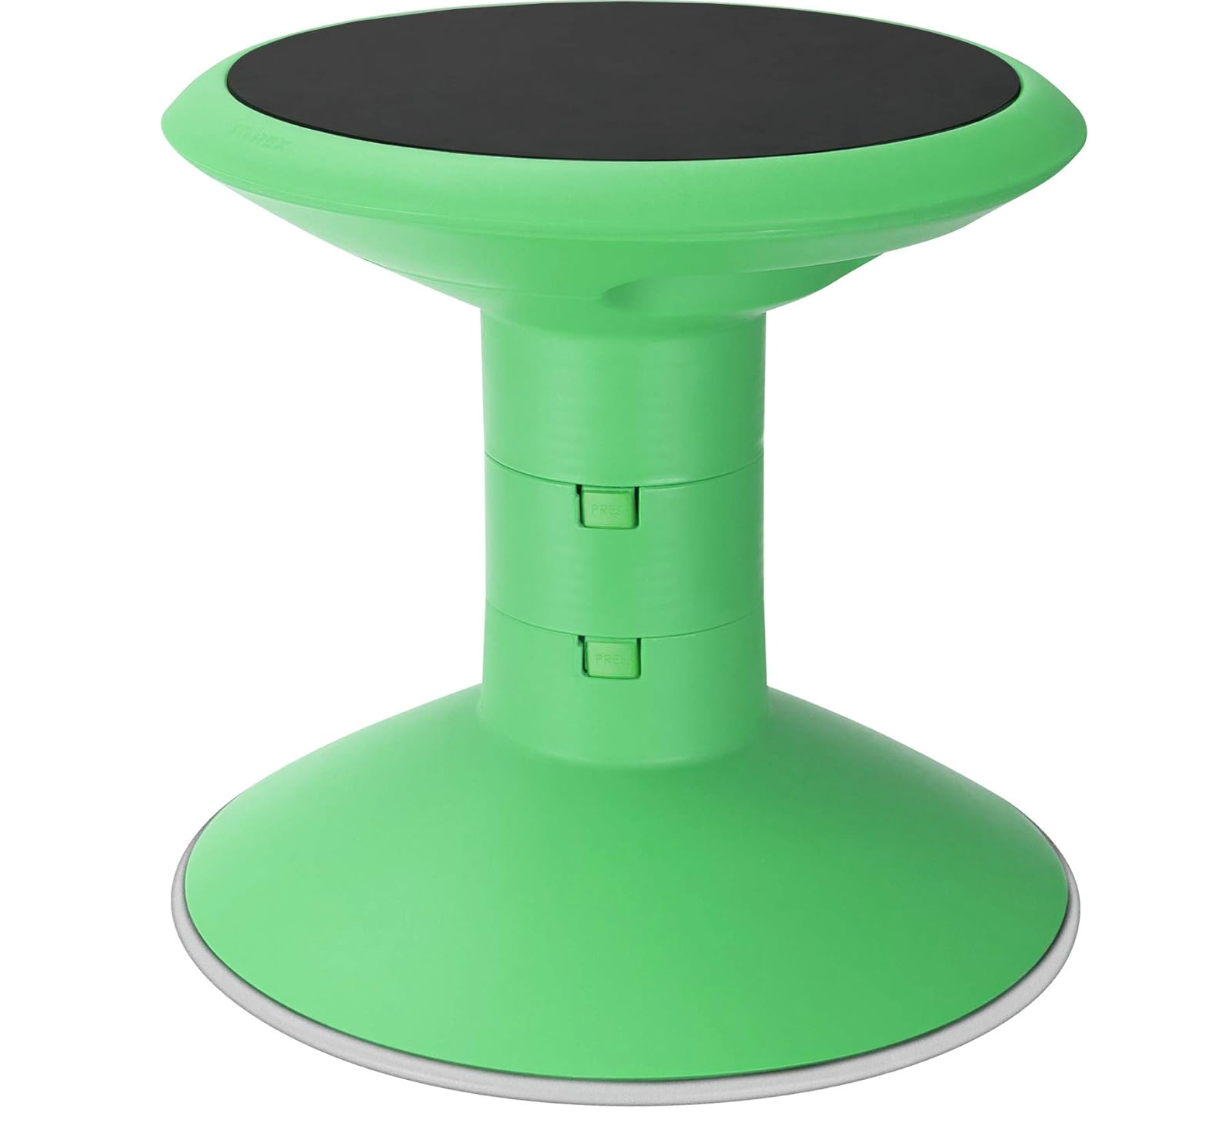 Wobble Stool for home or classroom